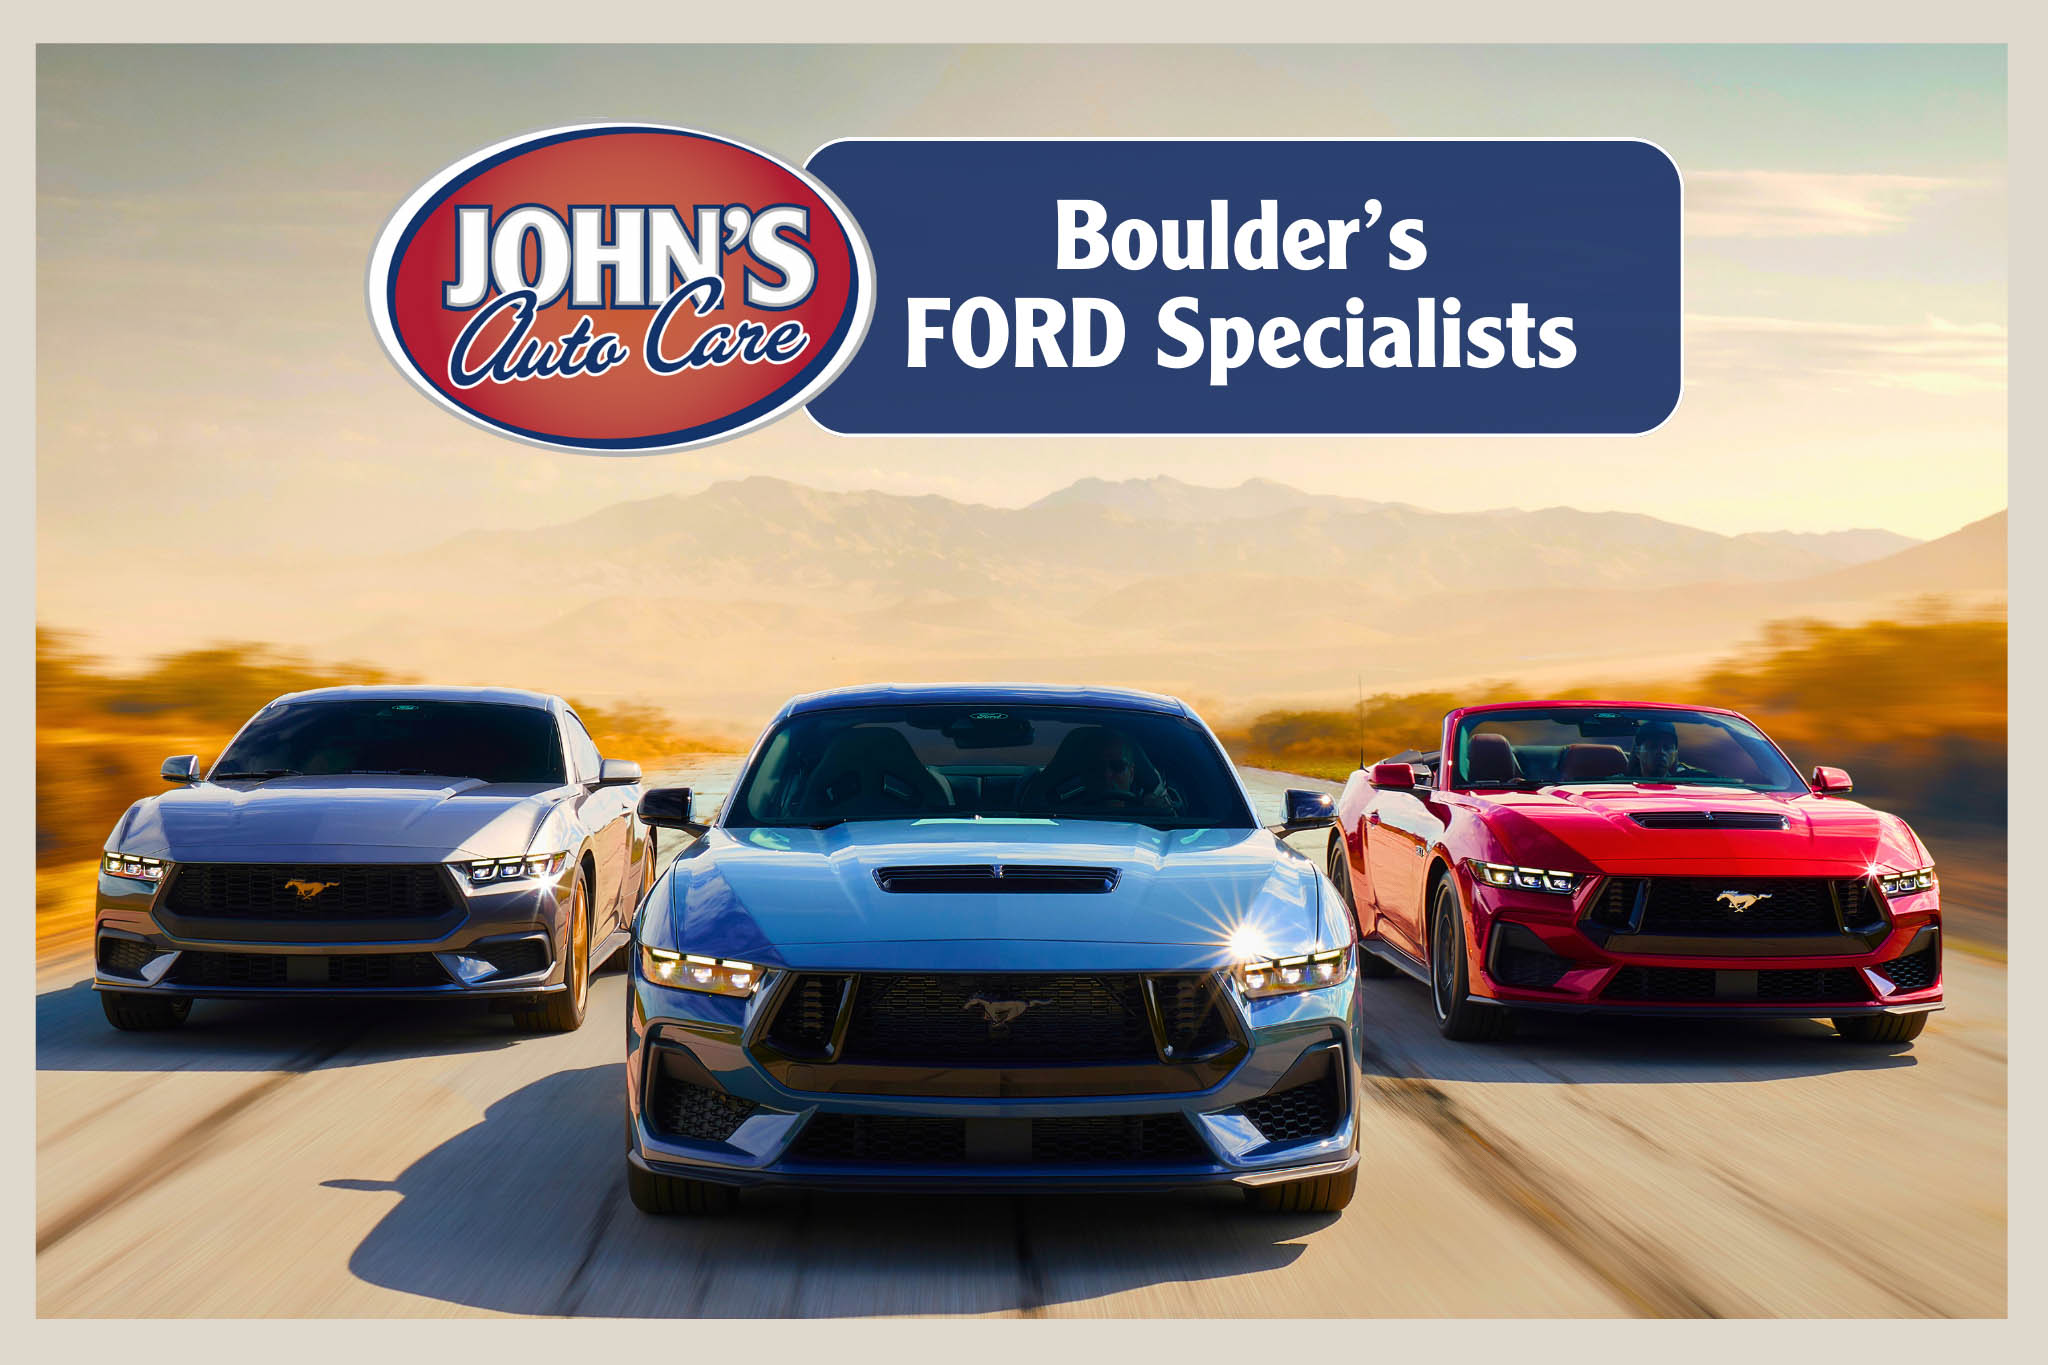 John's Auto Care: Your Trusted Ford Repair Shop in Boulder County